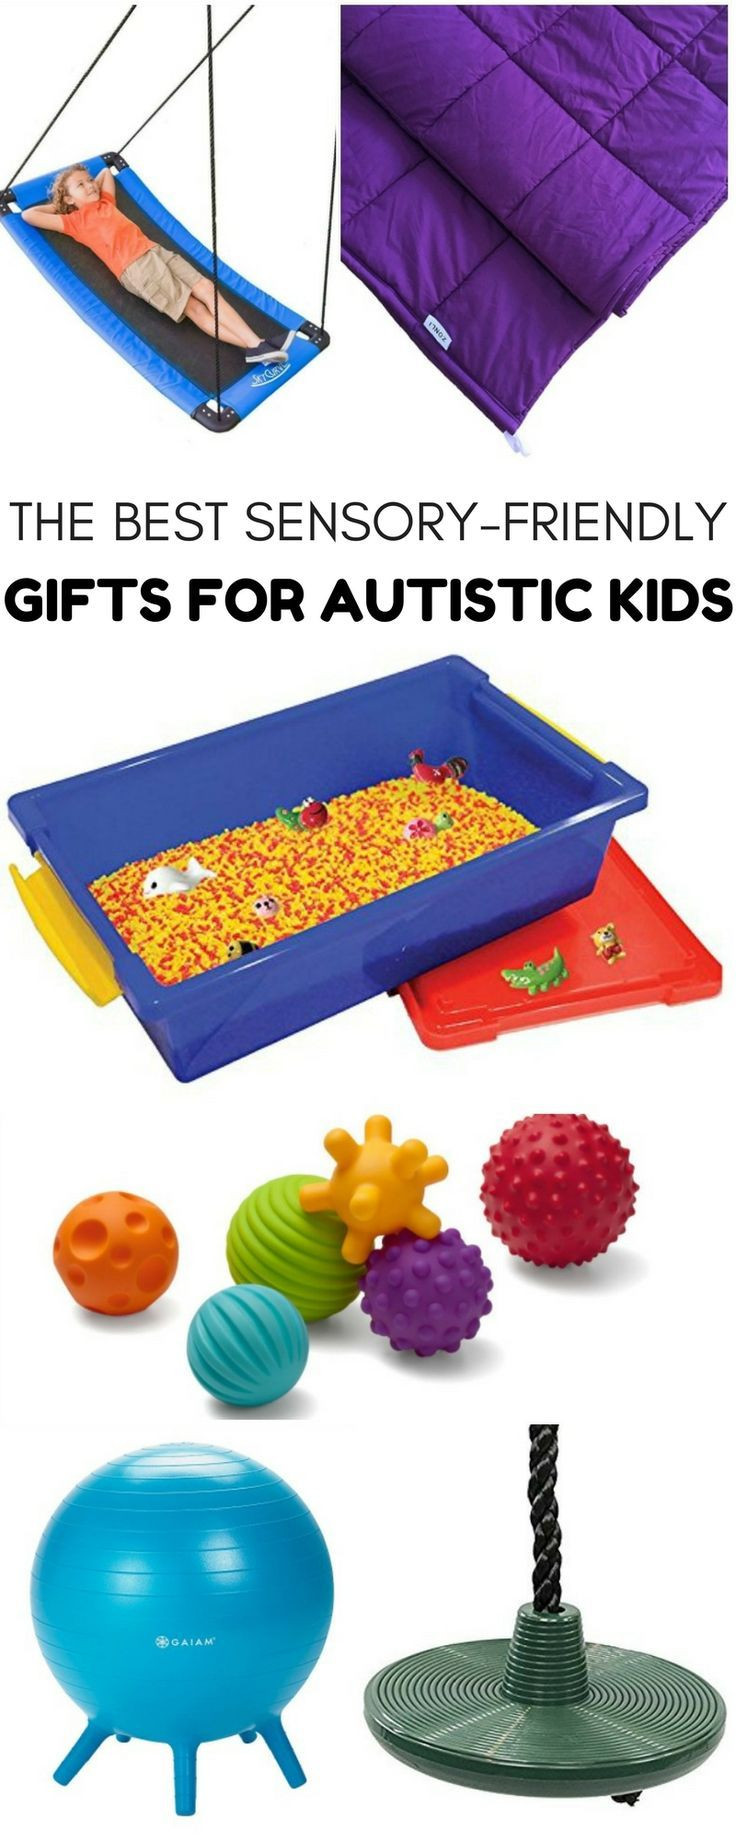 Christmas Gifts Ideas For Autistic Child
 The Best Sensory Friendly Gifts for Autistic Kids